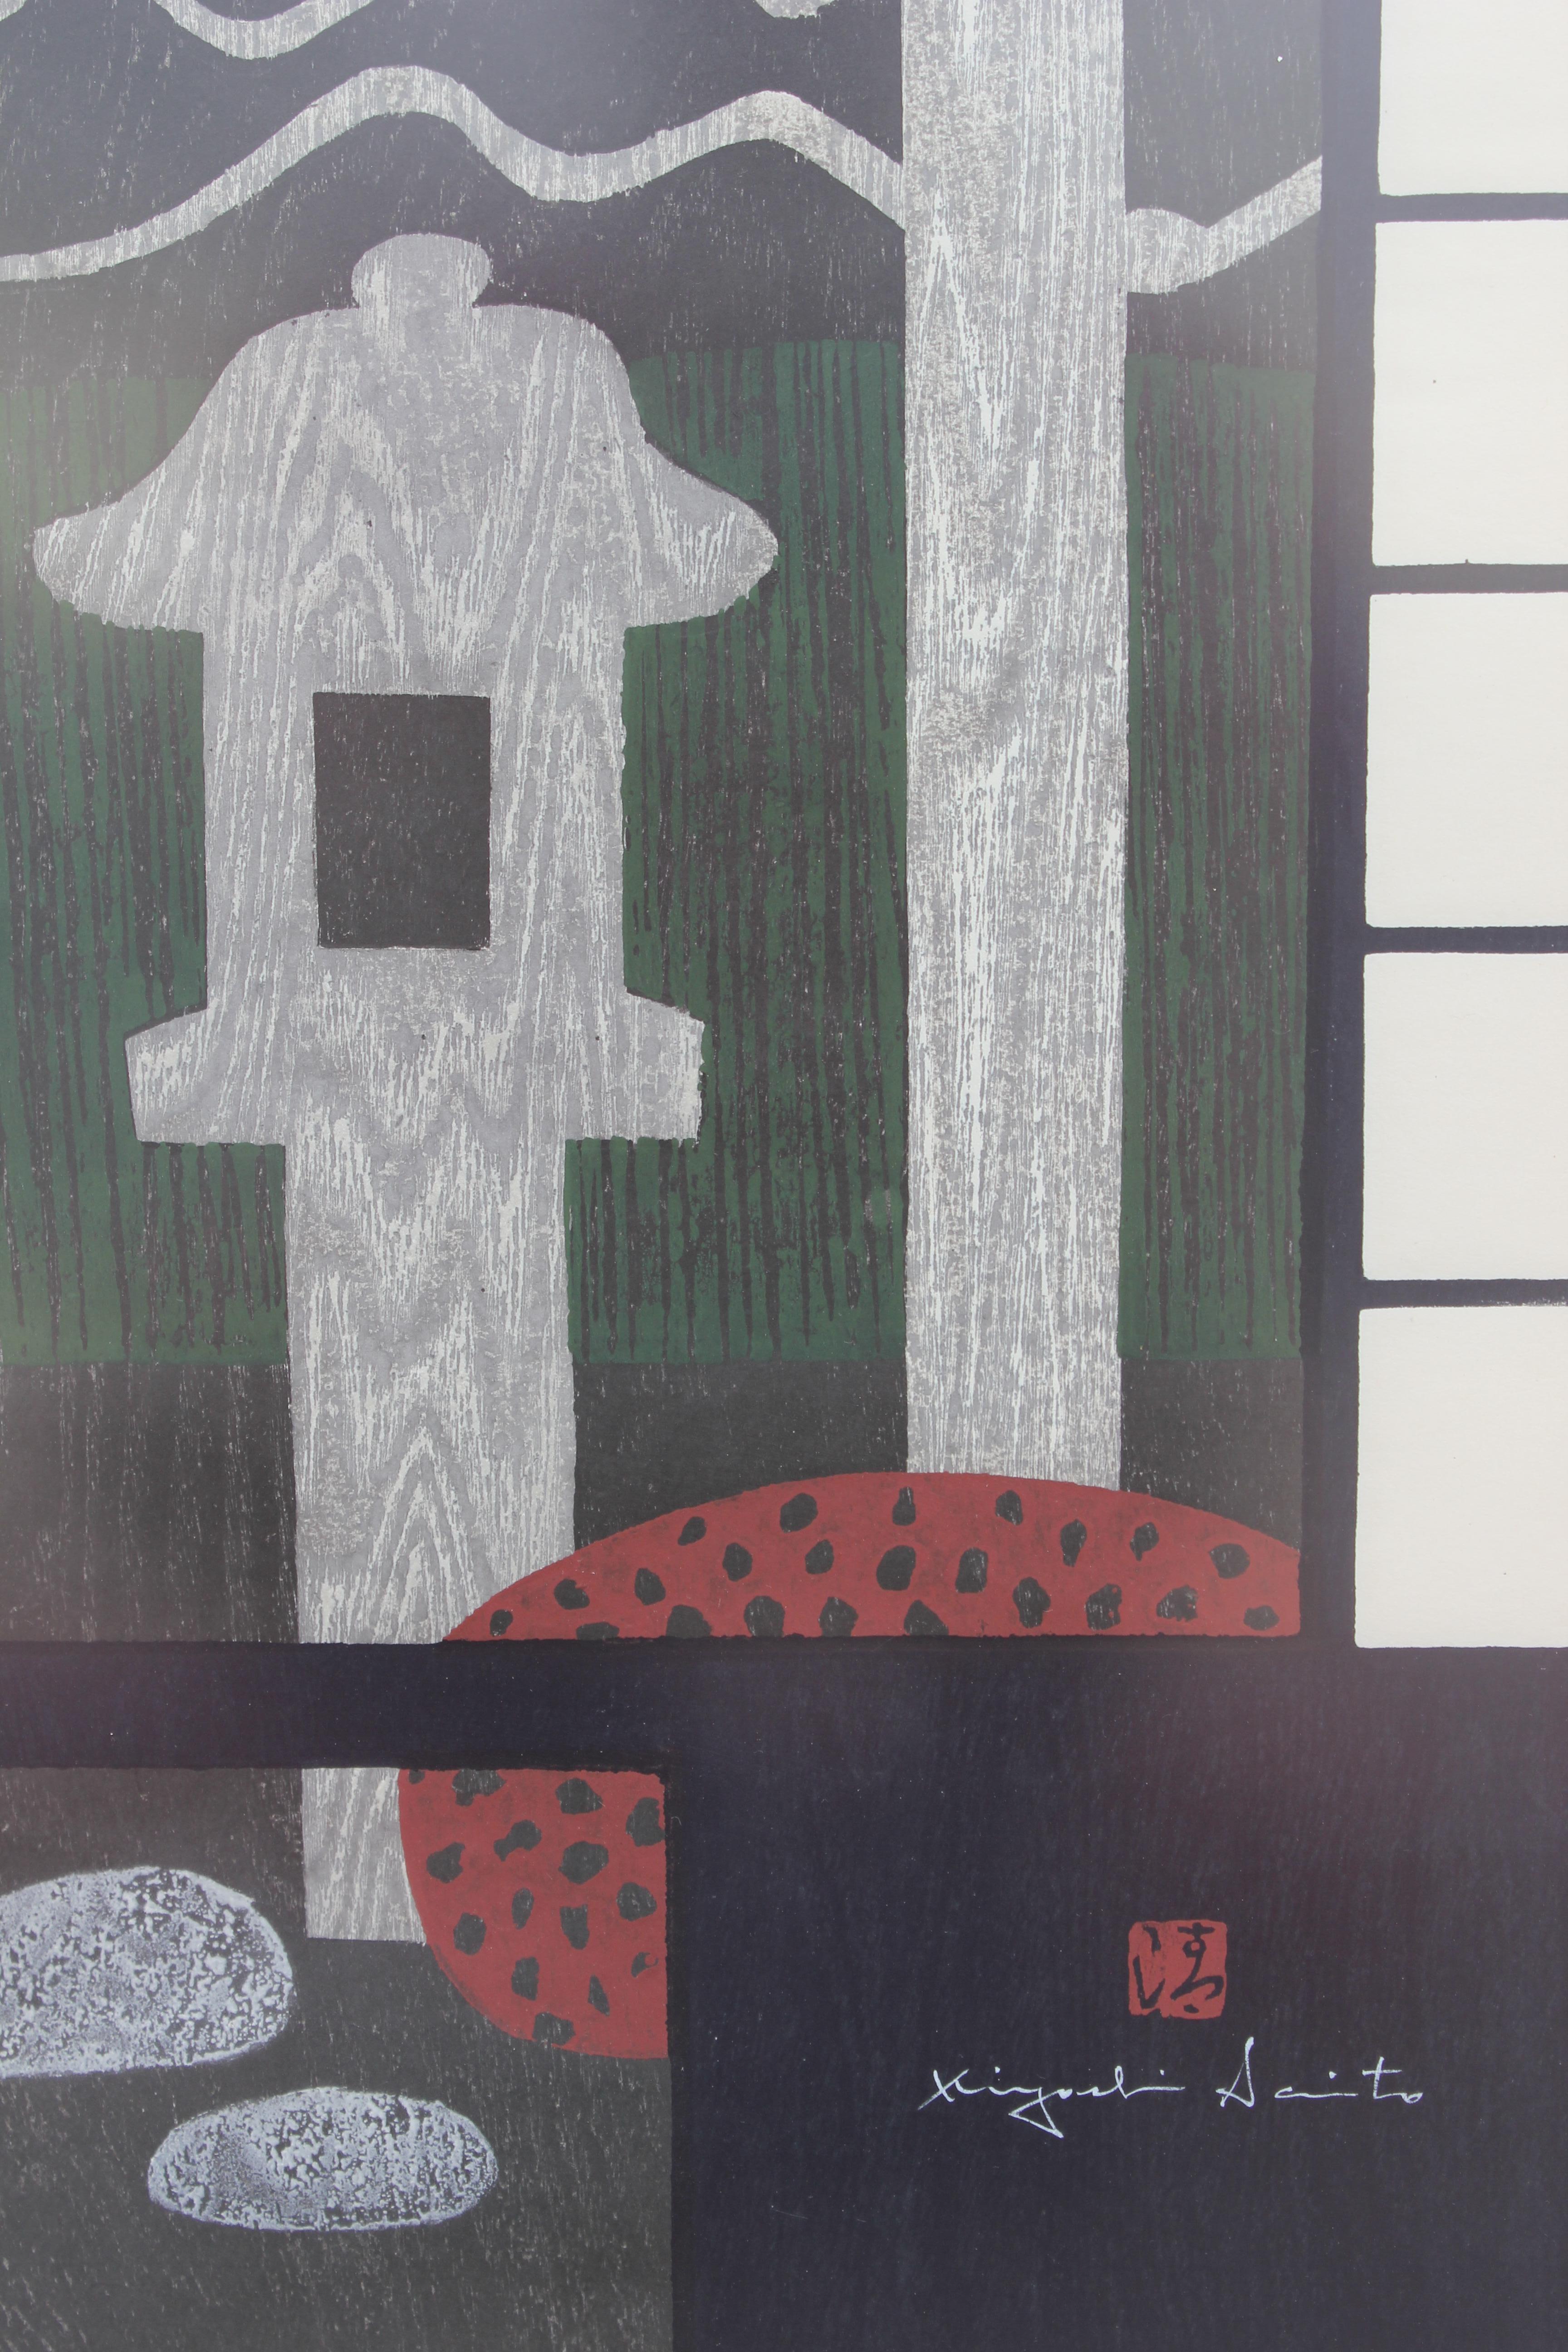 Mabuchi Tōru (1920 – 1994) Pottery and Haniwa Figure 1960. Modern, Japanese style still-life print of an Oribe latern and screen. Signature and seal lower right. Mat board covers margins which may have edition, date and title. Visible area: H 22